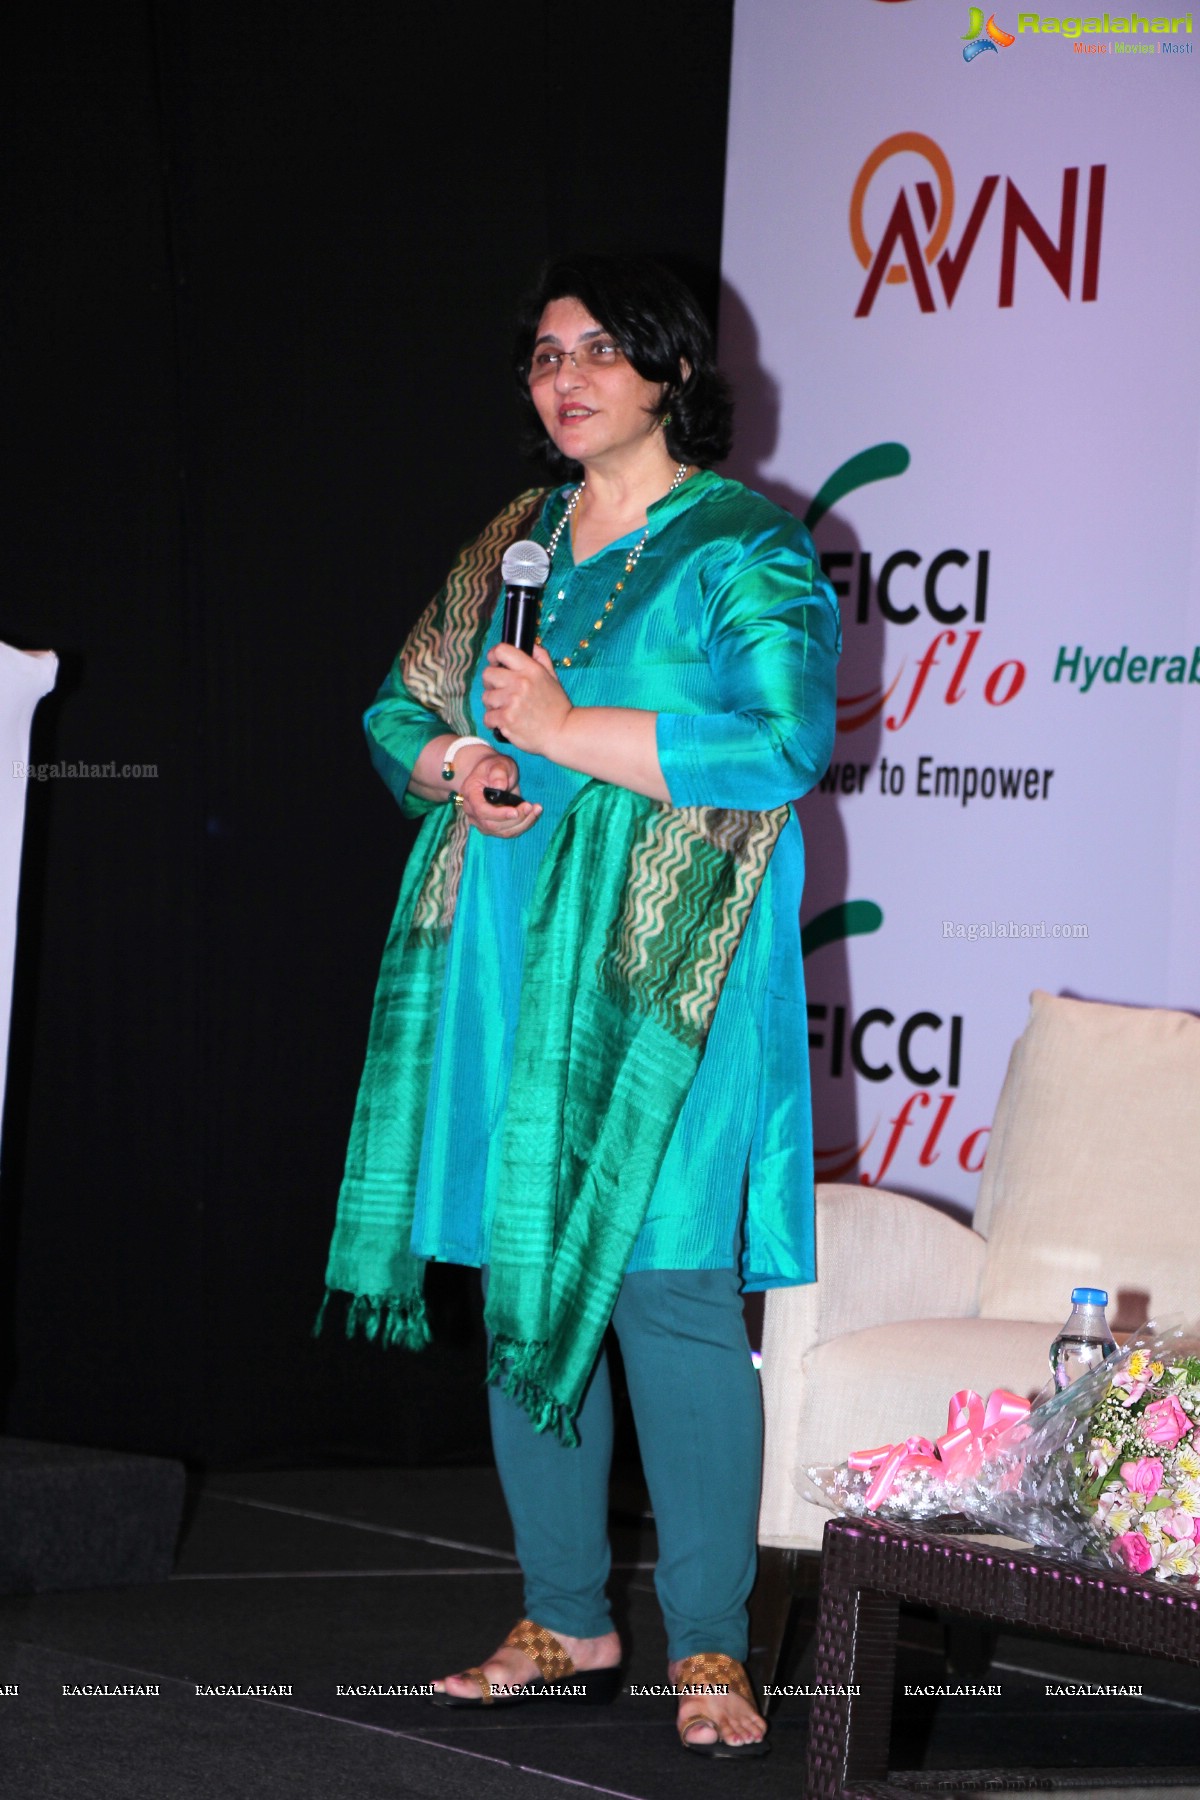 Gift of Life - An Interactive Session with Dr. Firuza Parikh and Dr. Roma Sinha by FICCI at Park Hyatt, Hyderabad